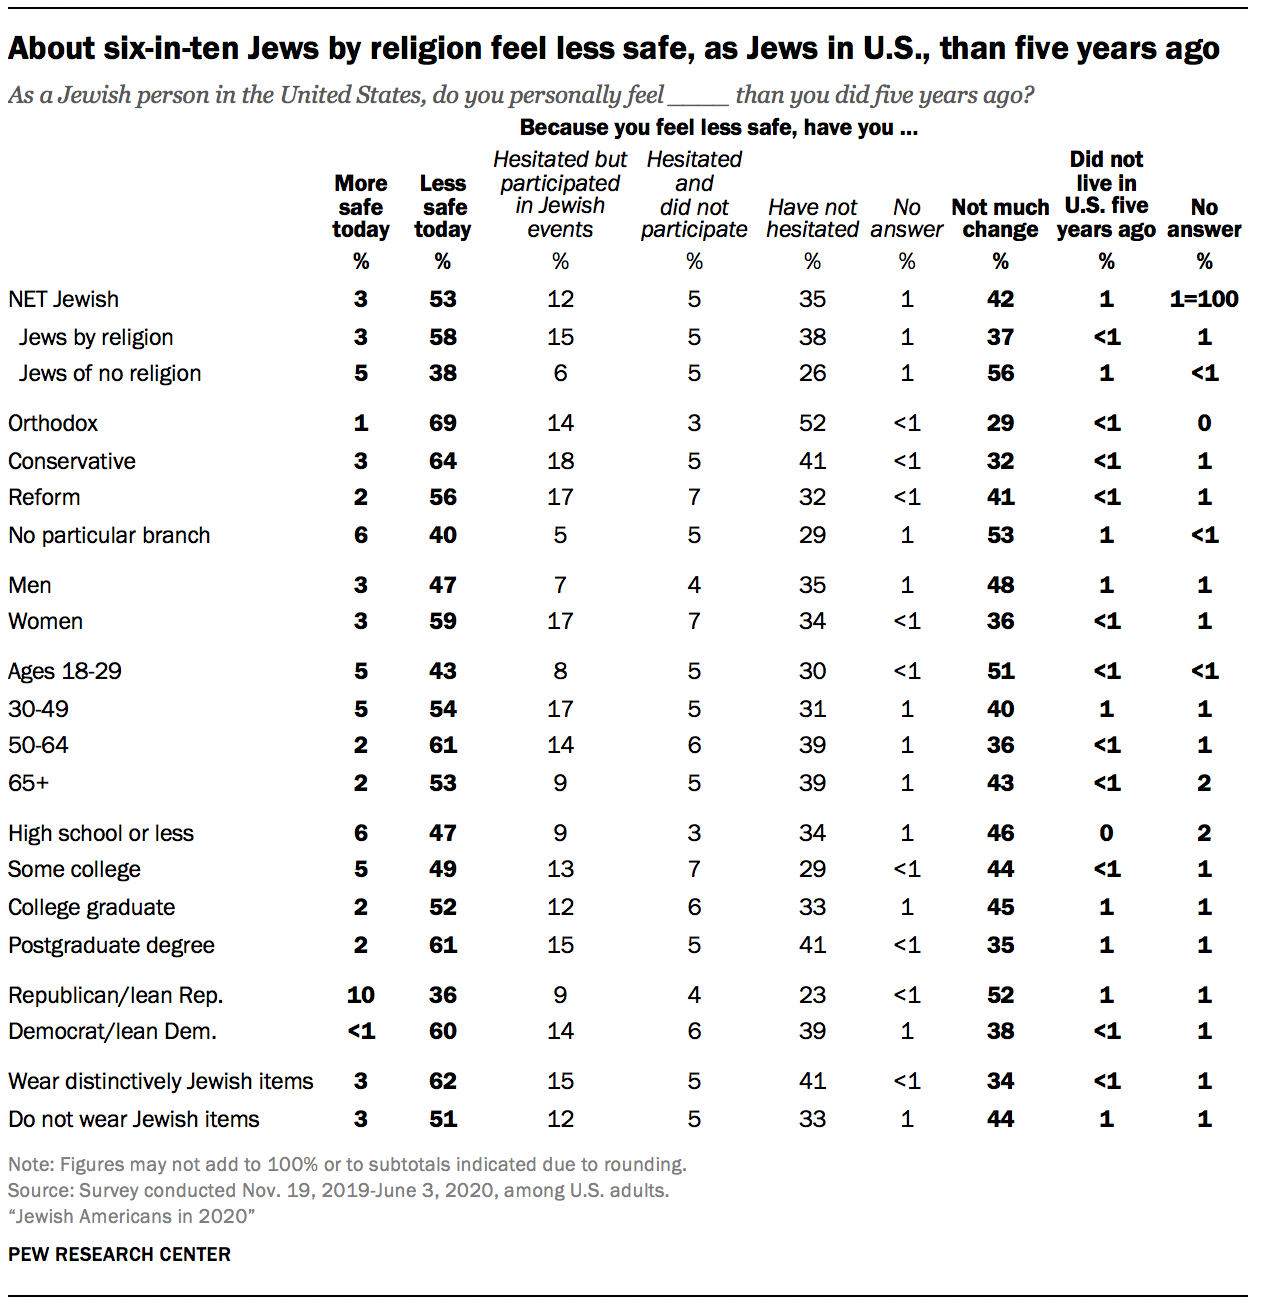 About six-in-ten Jews by religion feel less safe, as Jews in U.S., than five years ago